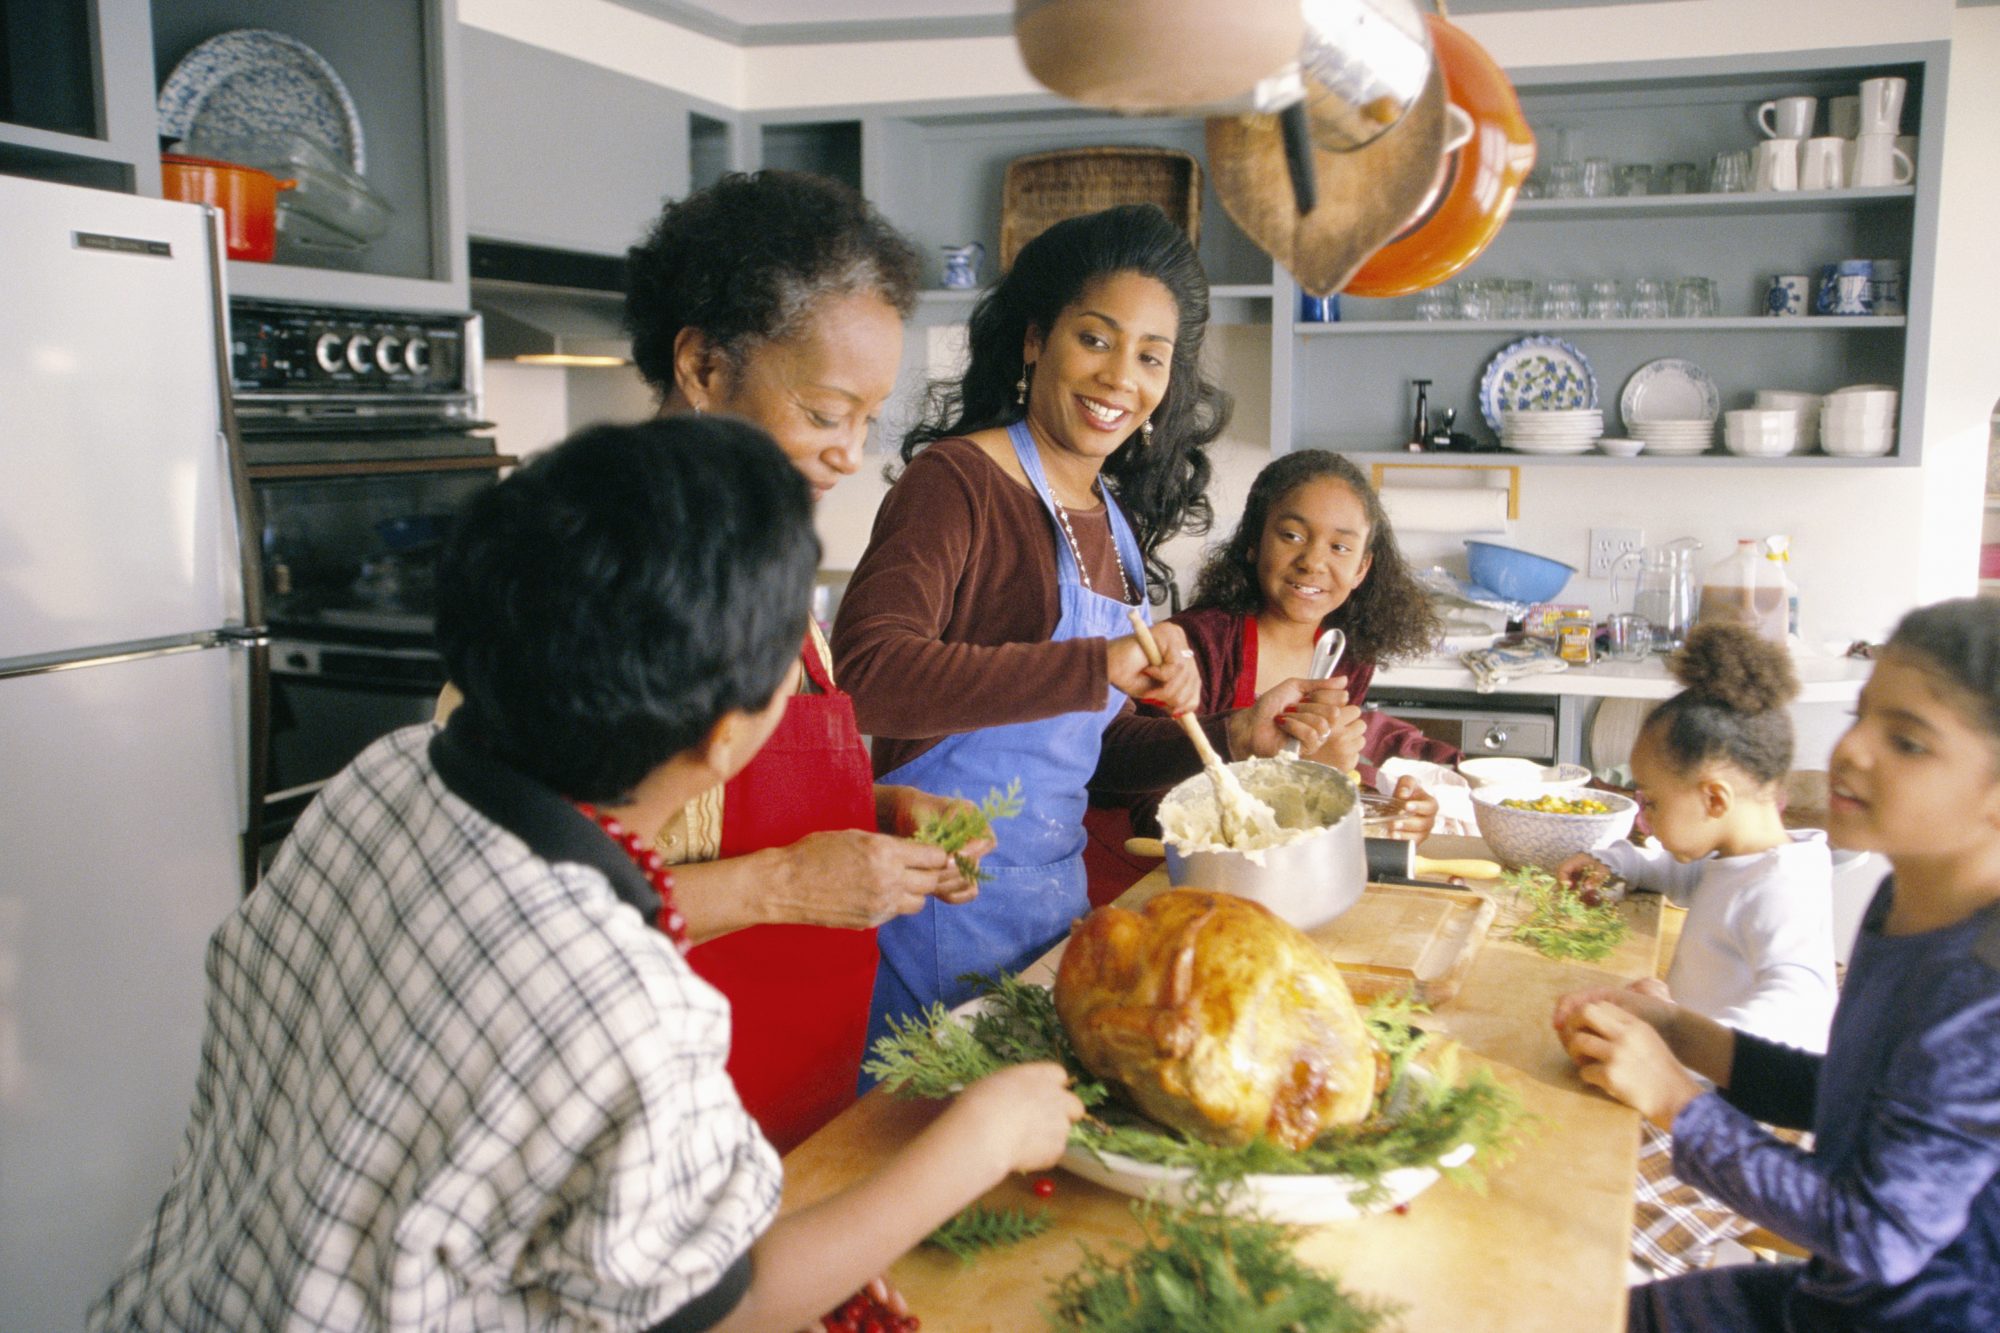 getty family preparing holiday dinner in the kitchen image